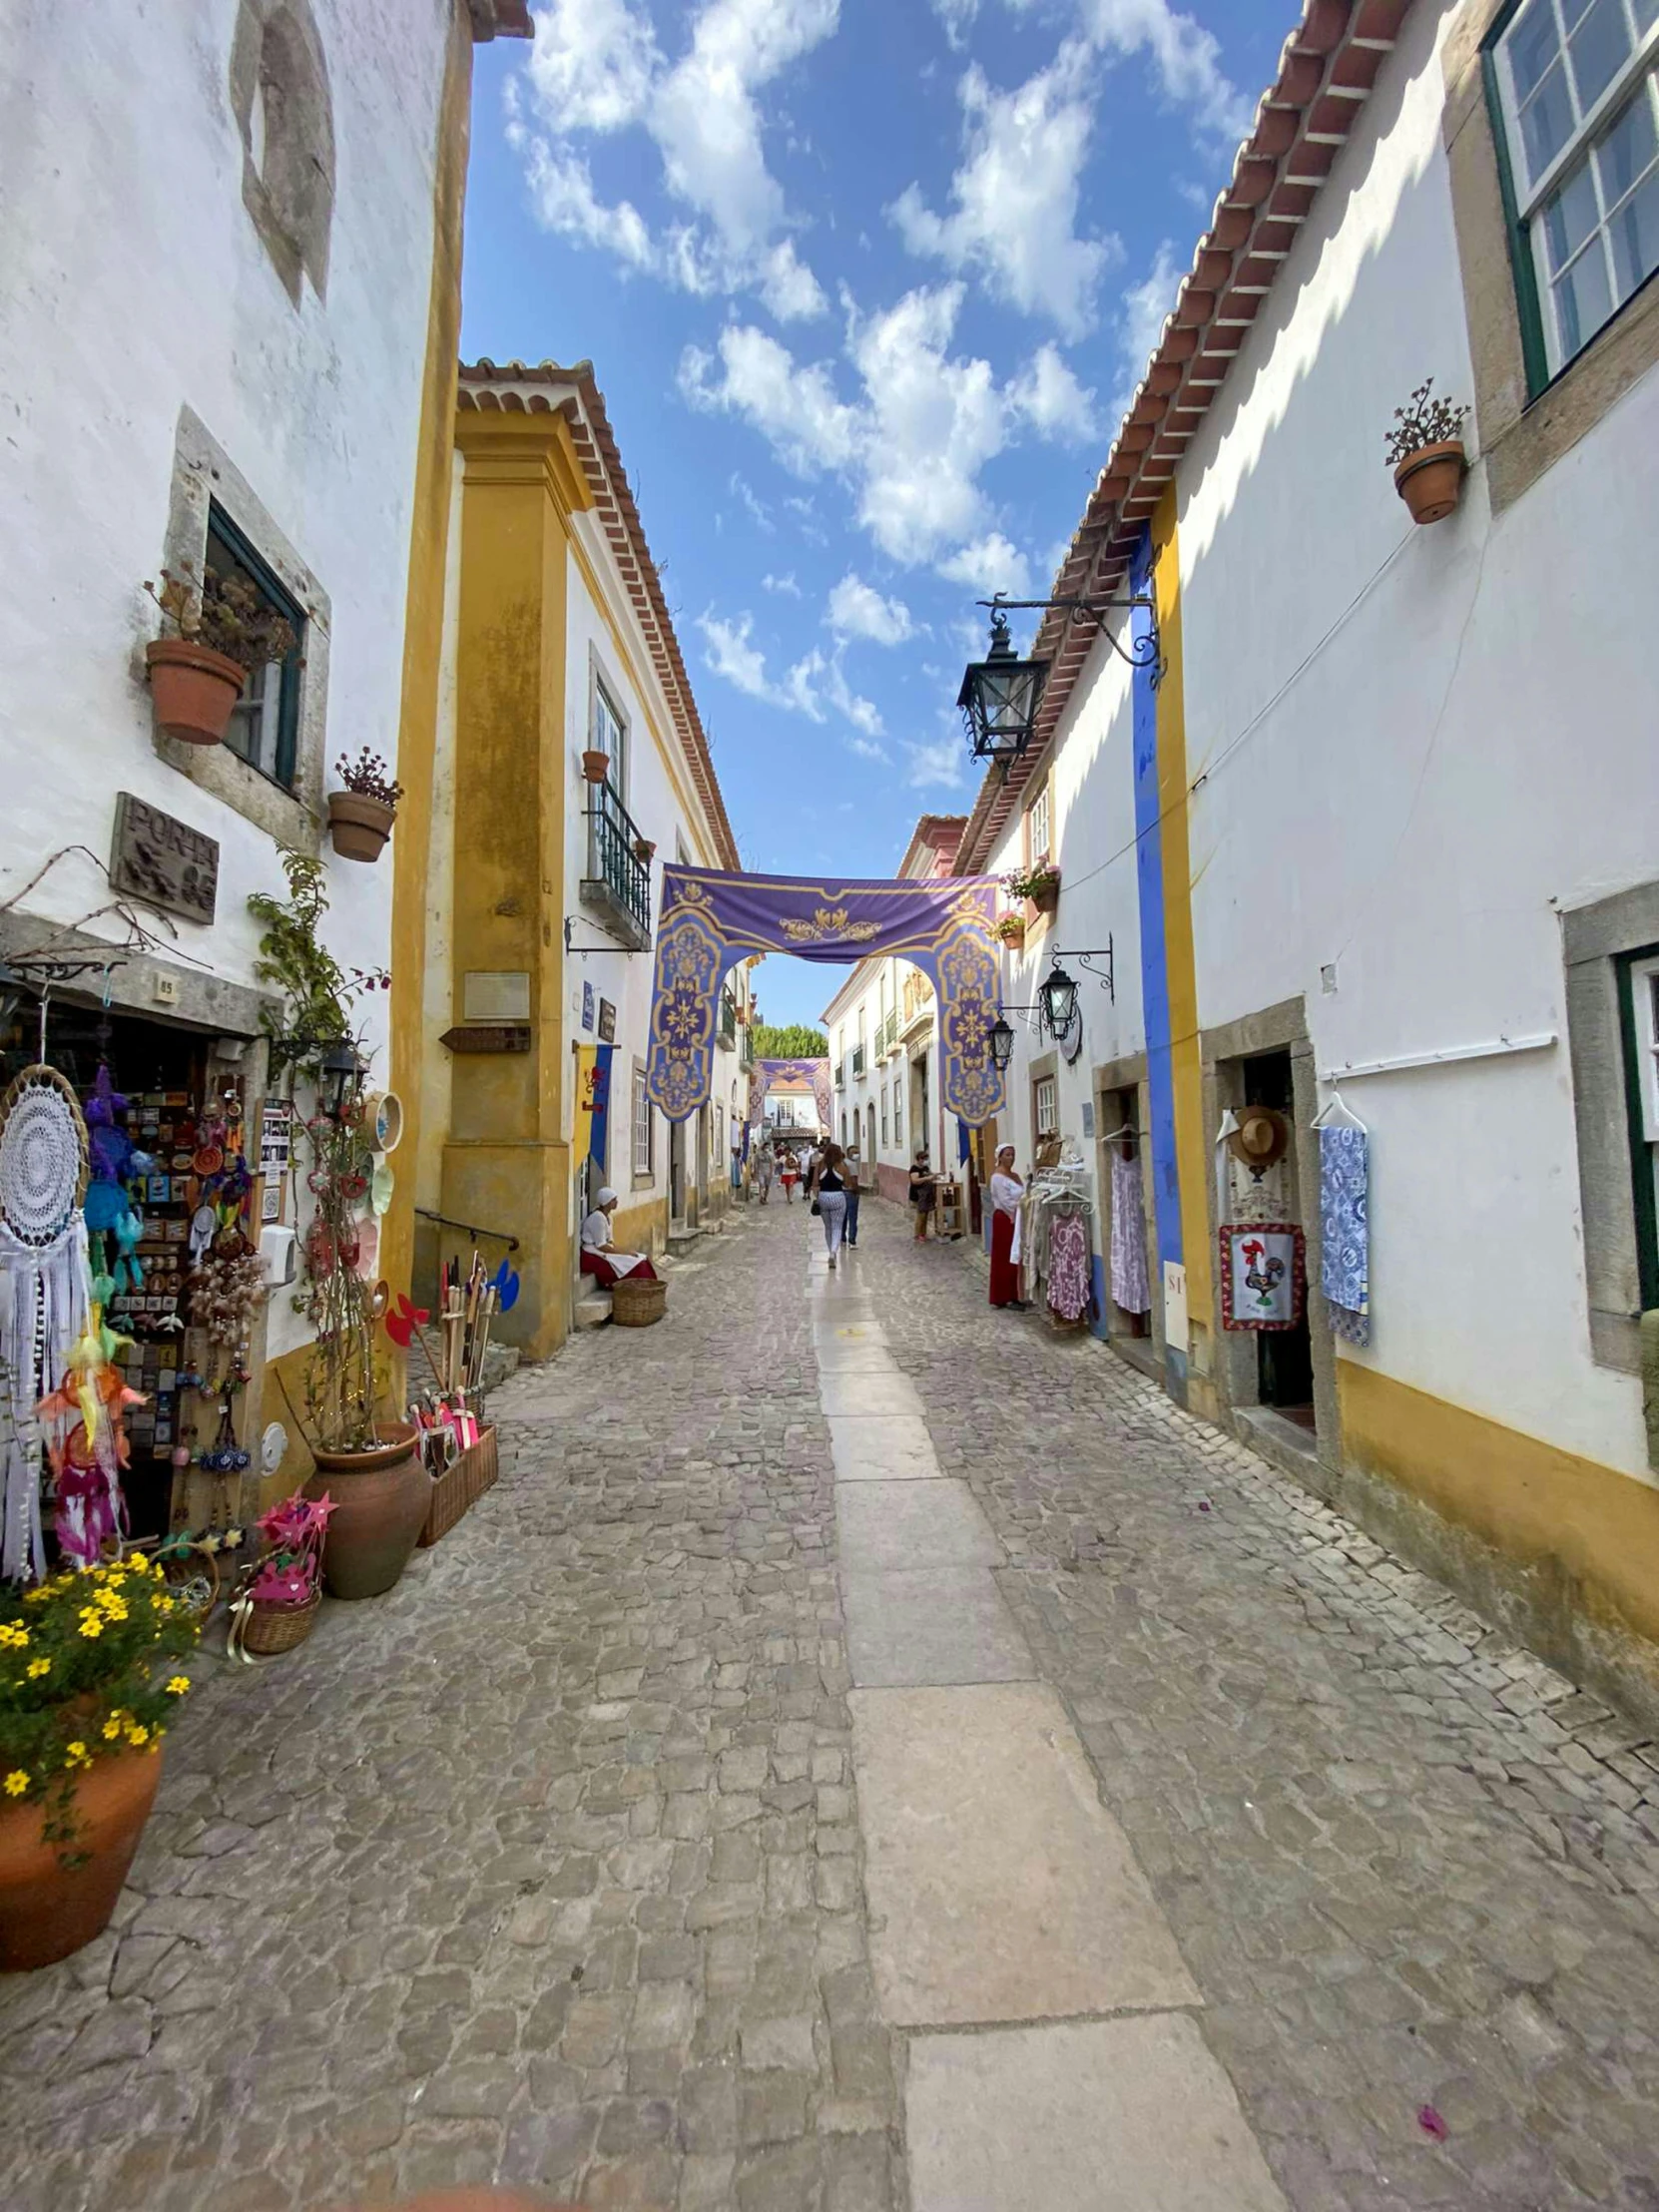 a narrow street with shops and restaurants near by